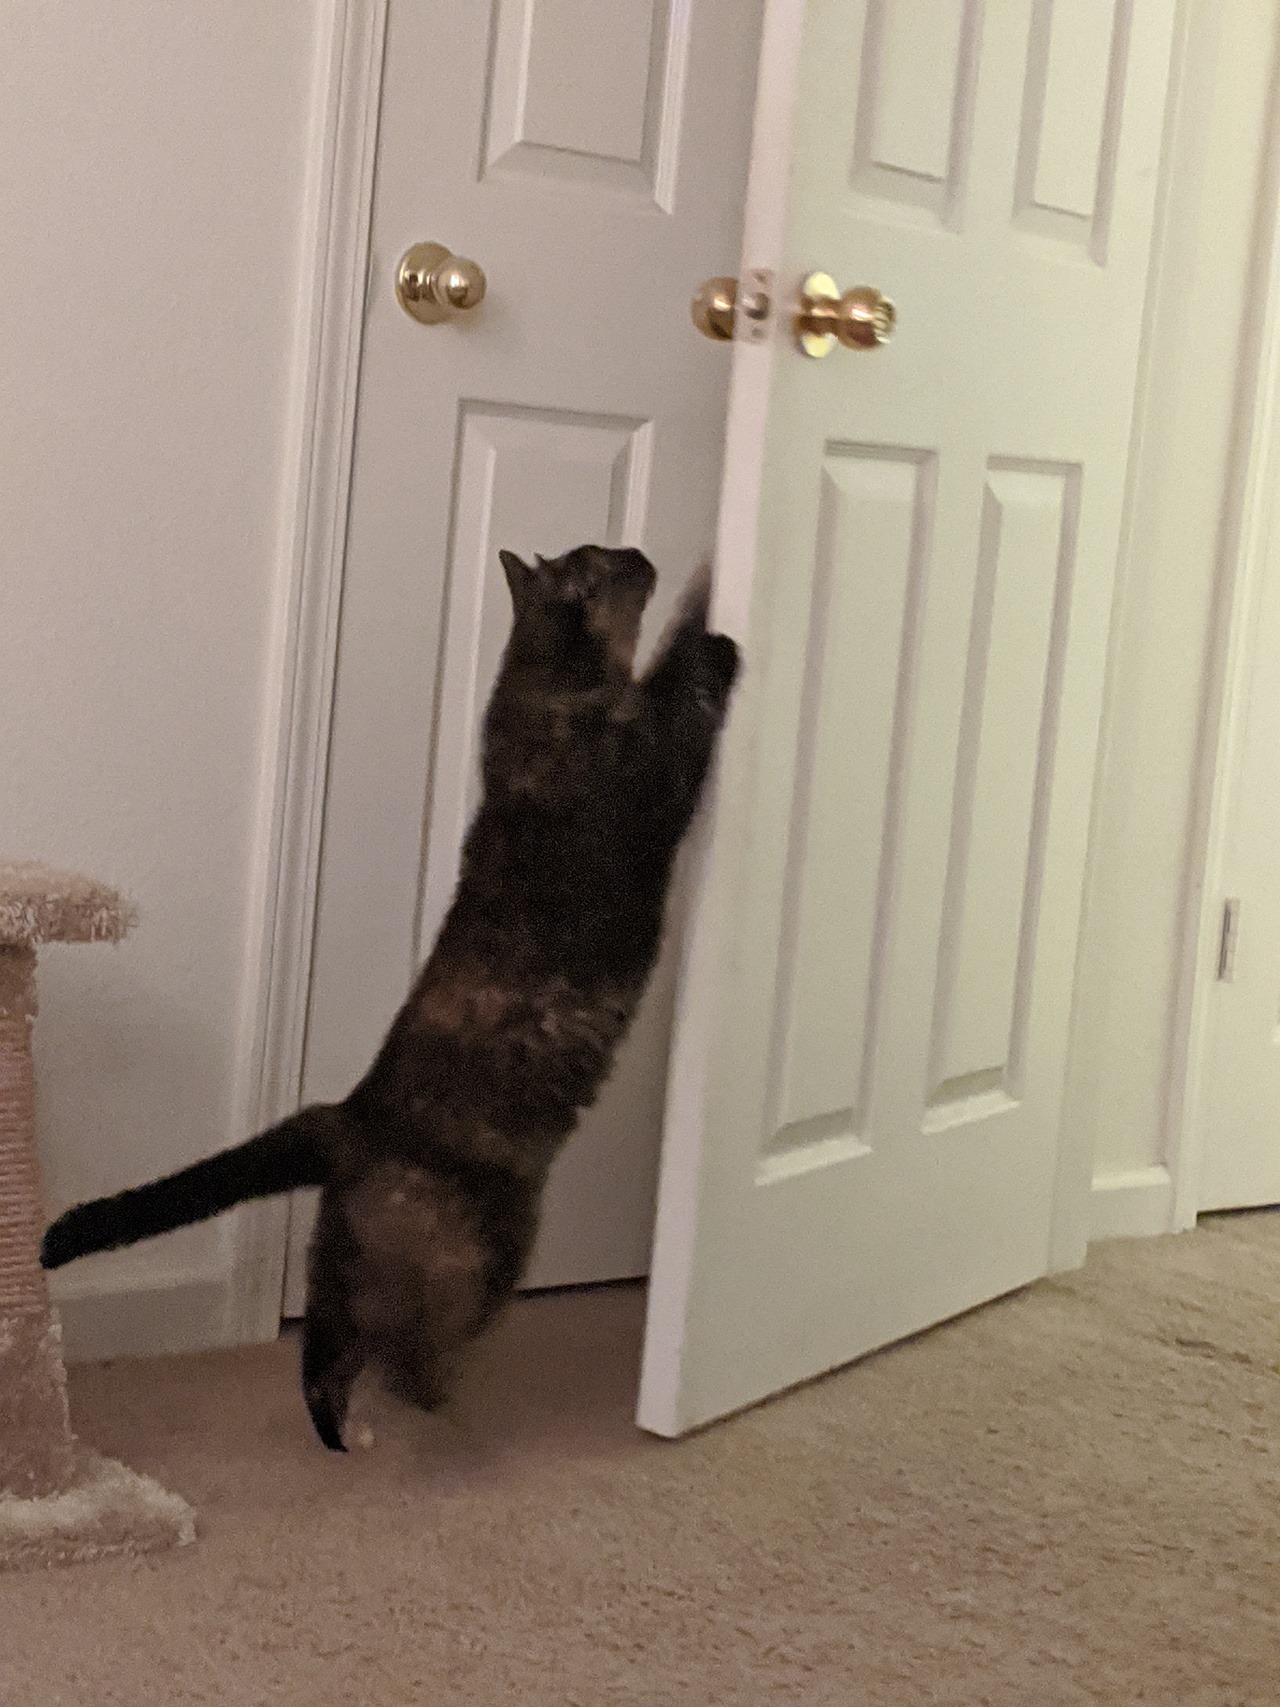 My new cat had a fascination with doors and adult photos